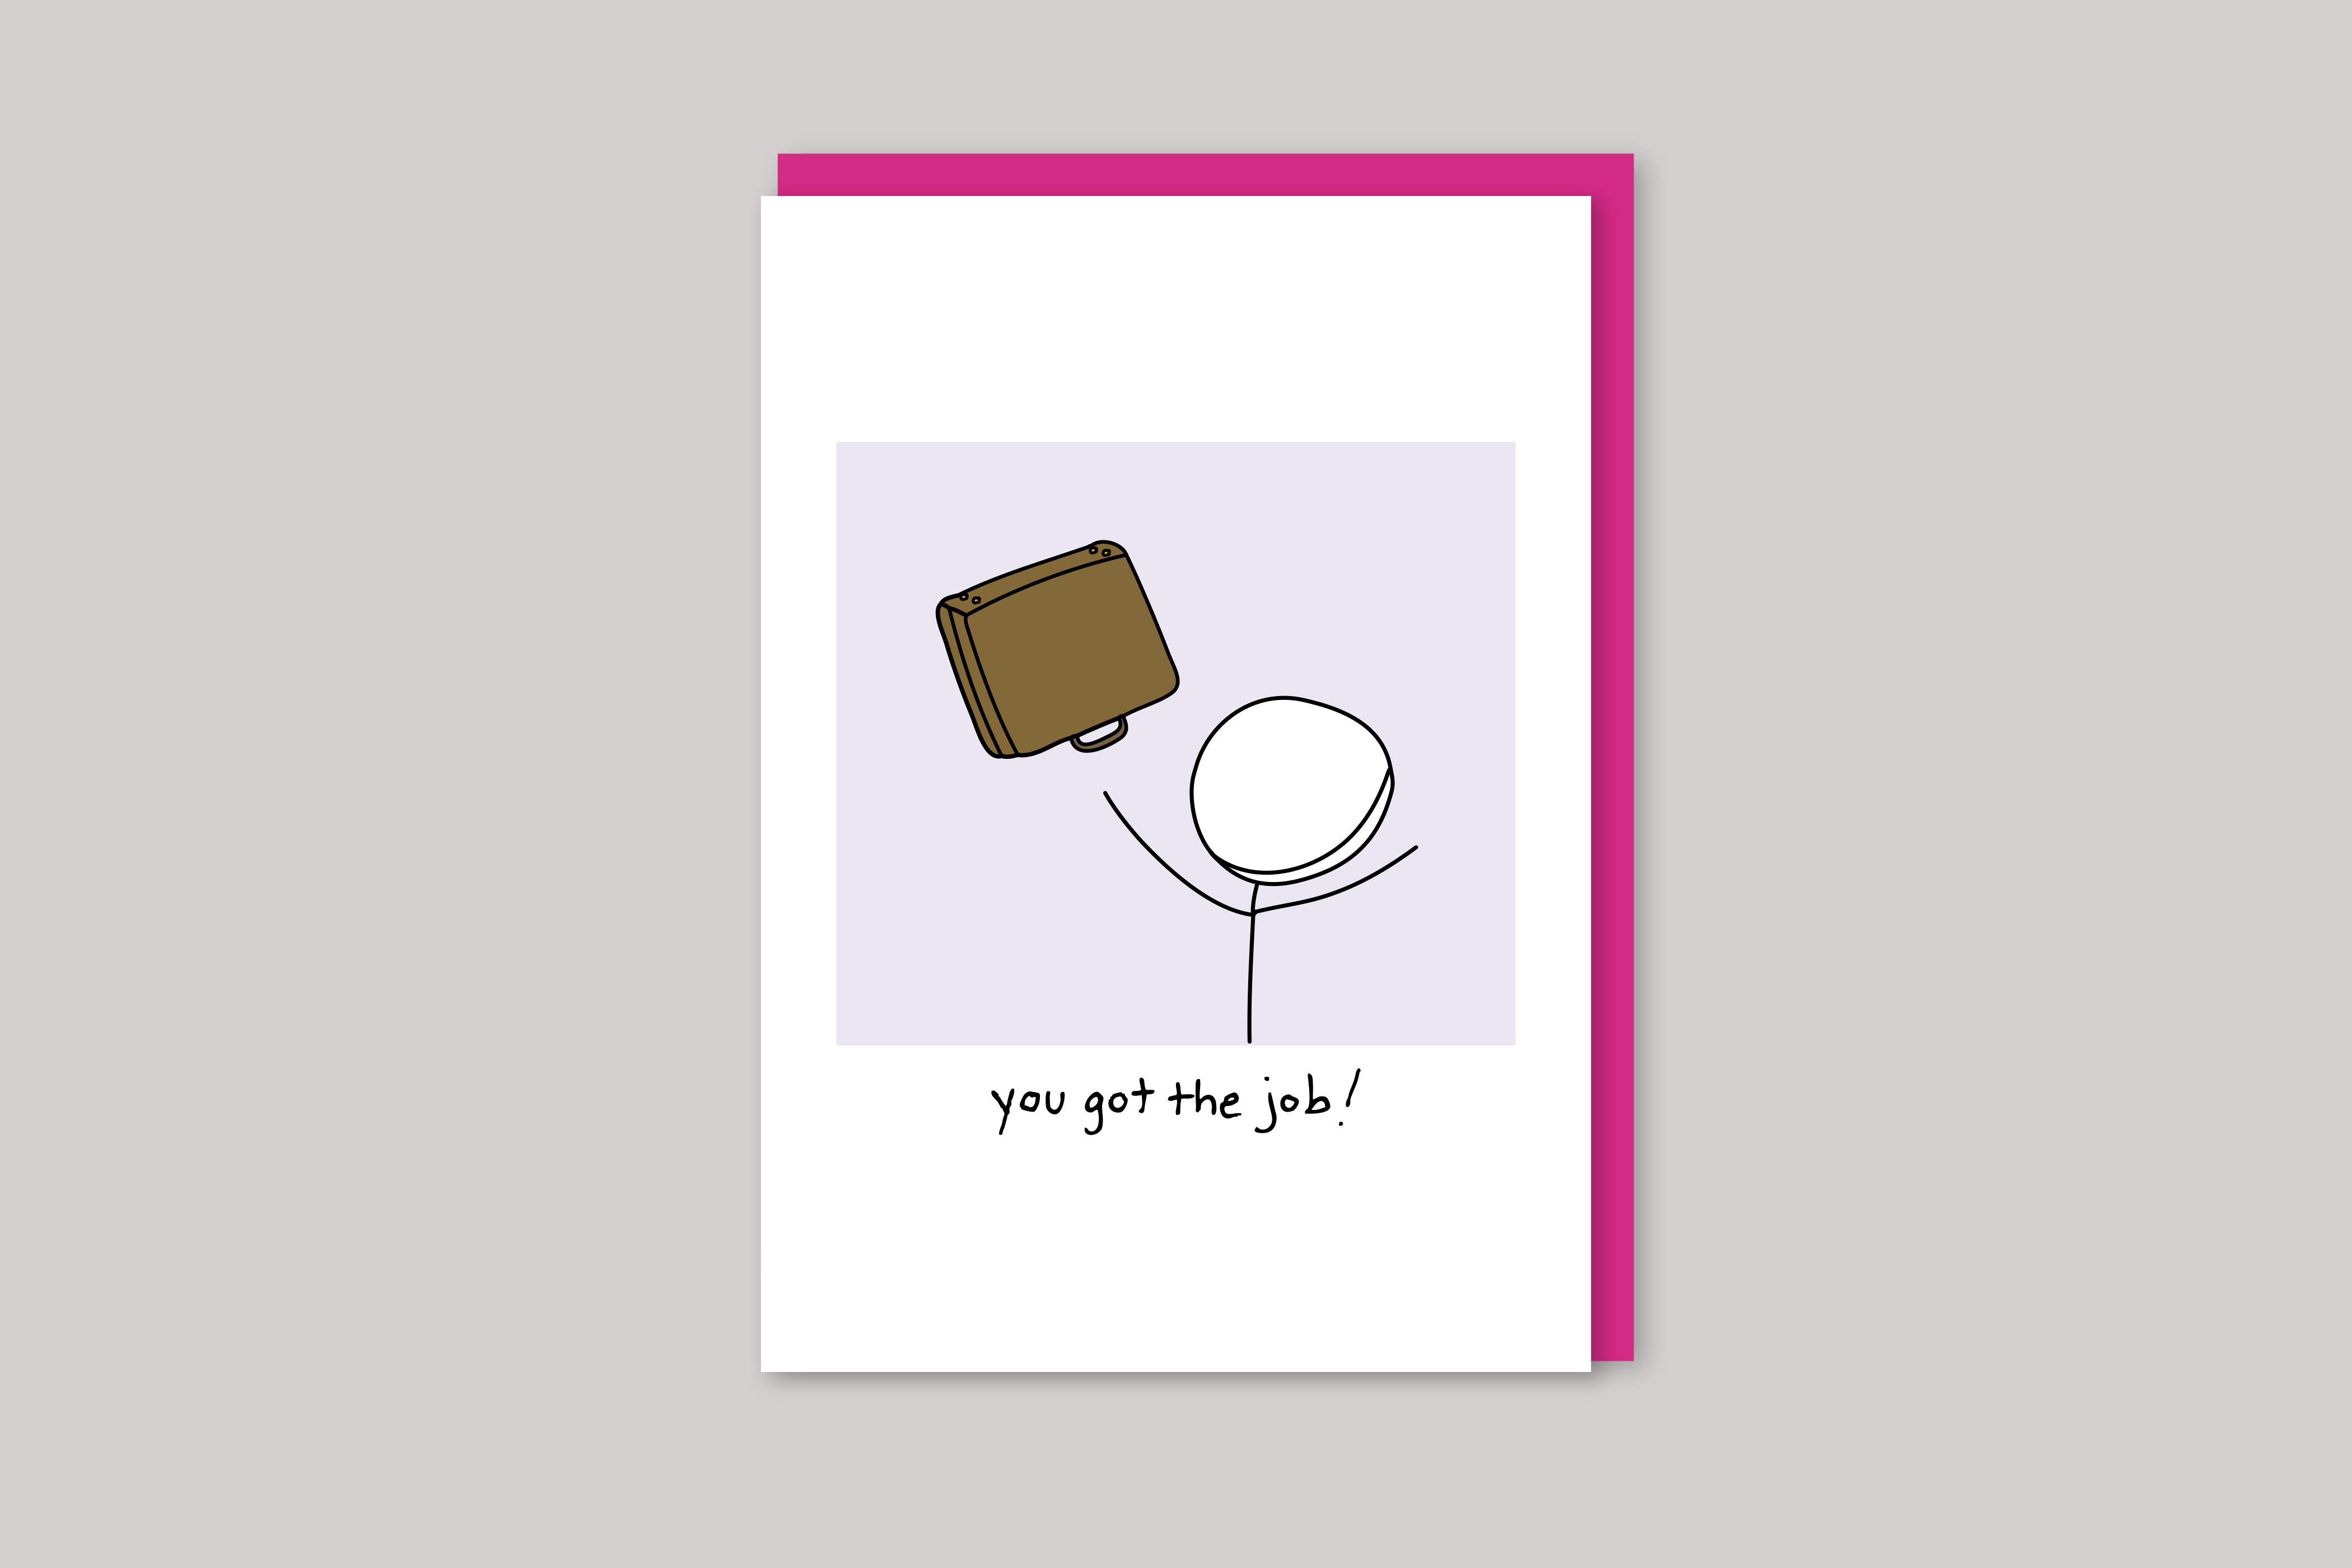 You Got The Job! new job card humorous illustration from Mean Cards range of greeting cards by Icon, back page.